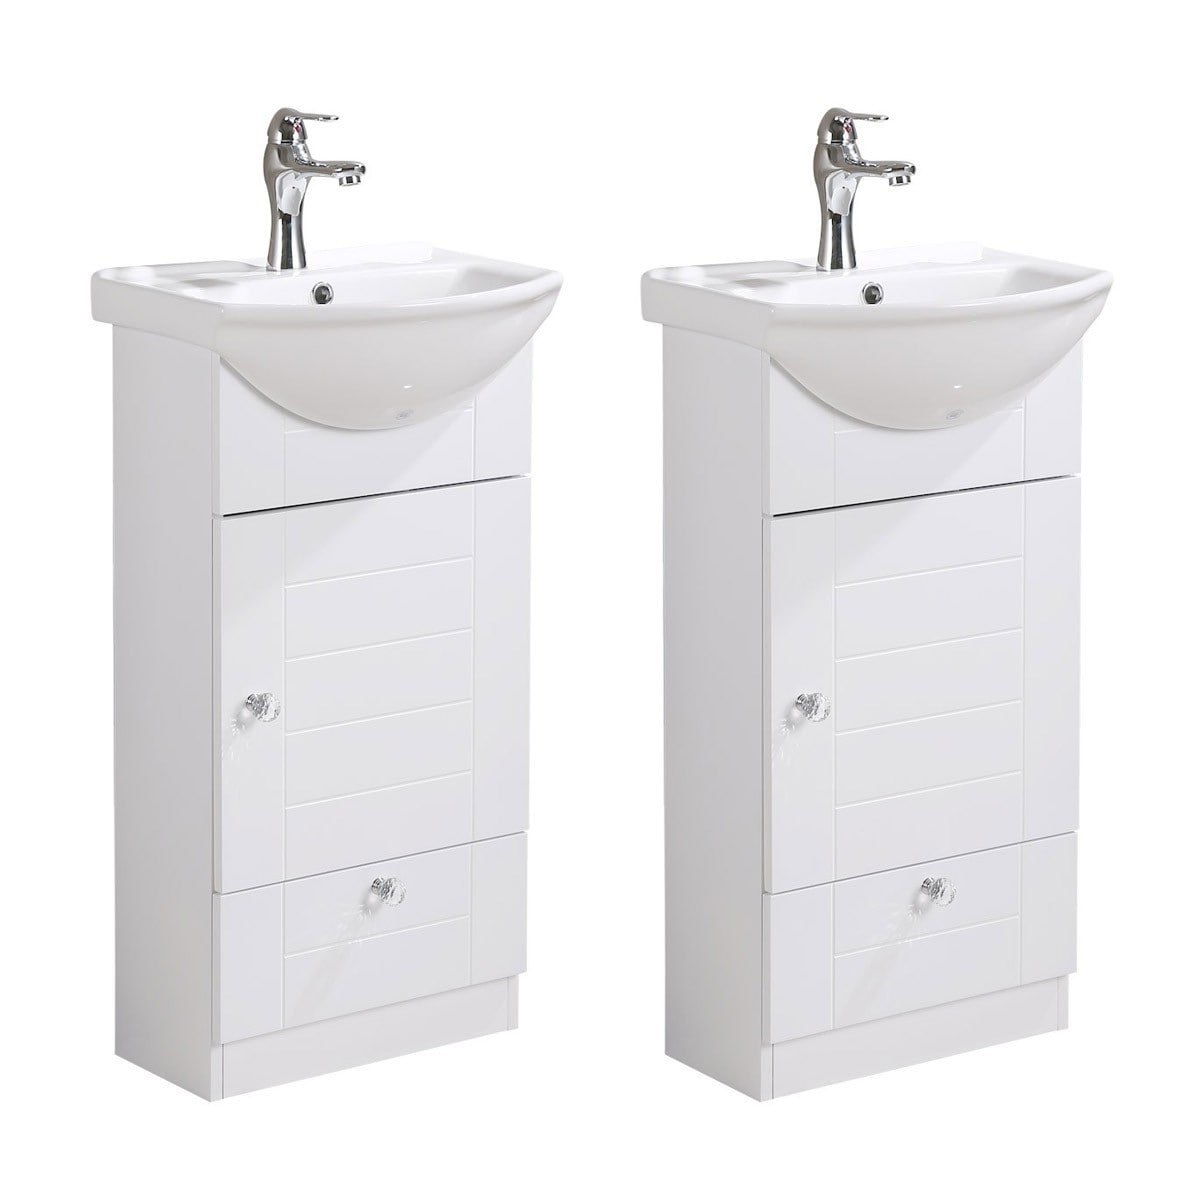 Vitreous China Small Vanity Sink For Bathroom With Faucet Cabinets Pack Of 2 On Sale Overstock 20690616